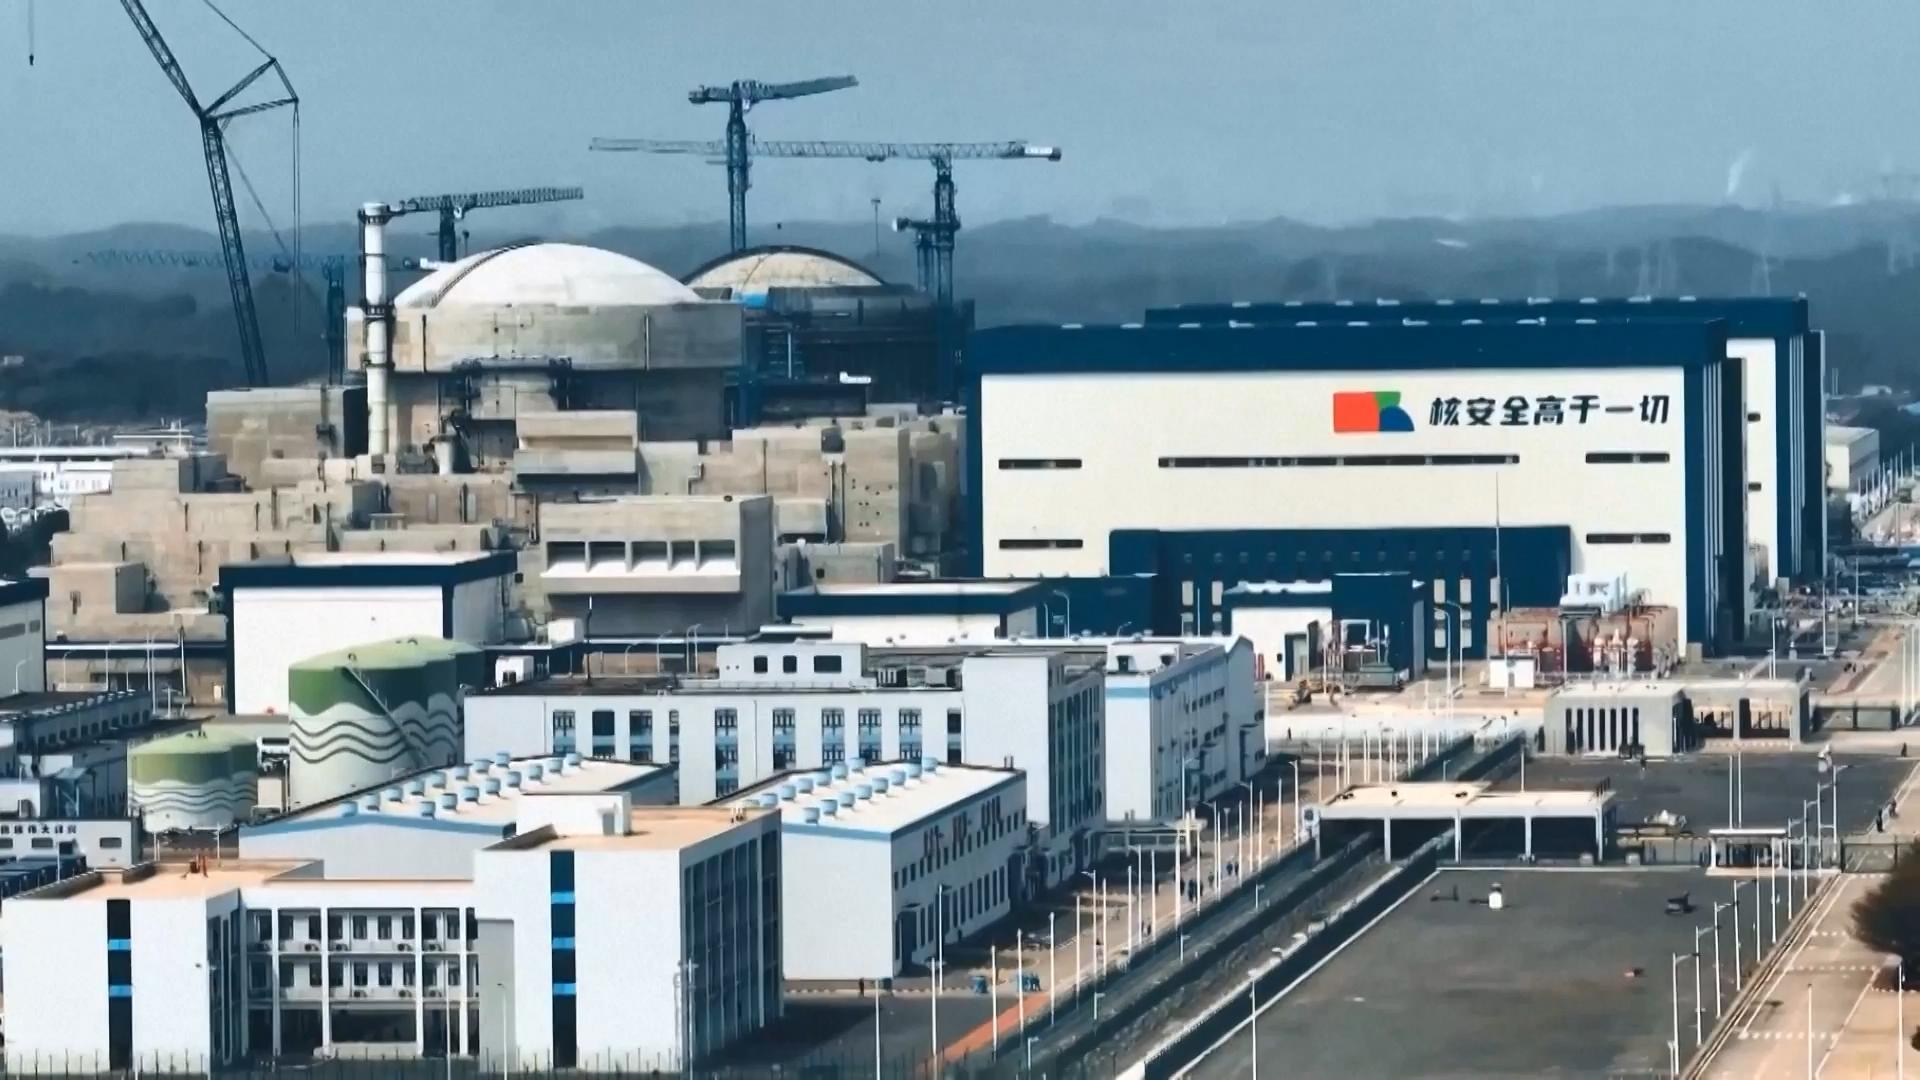 The No. 3 nuclear power unit of the Fangchenggang Nuclear Power Plant in south China's Guangxi Zhuang Autonomous Region. /CMG